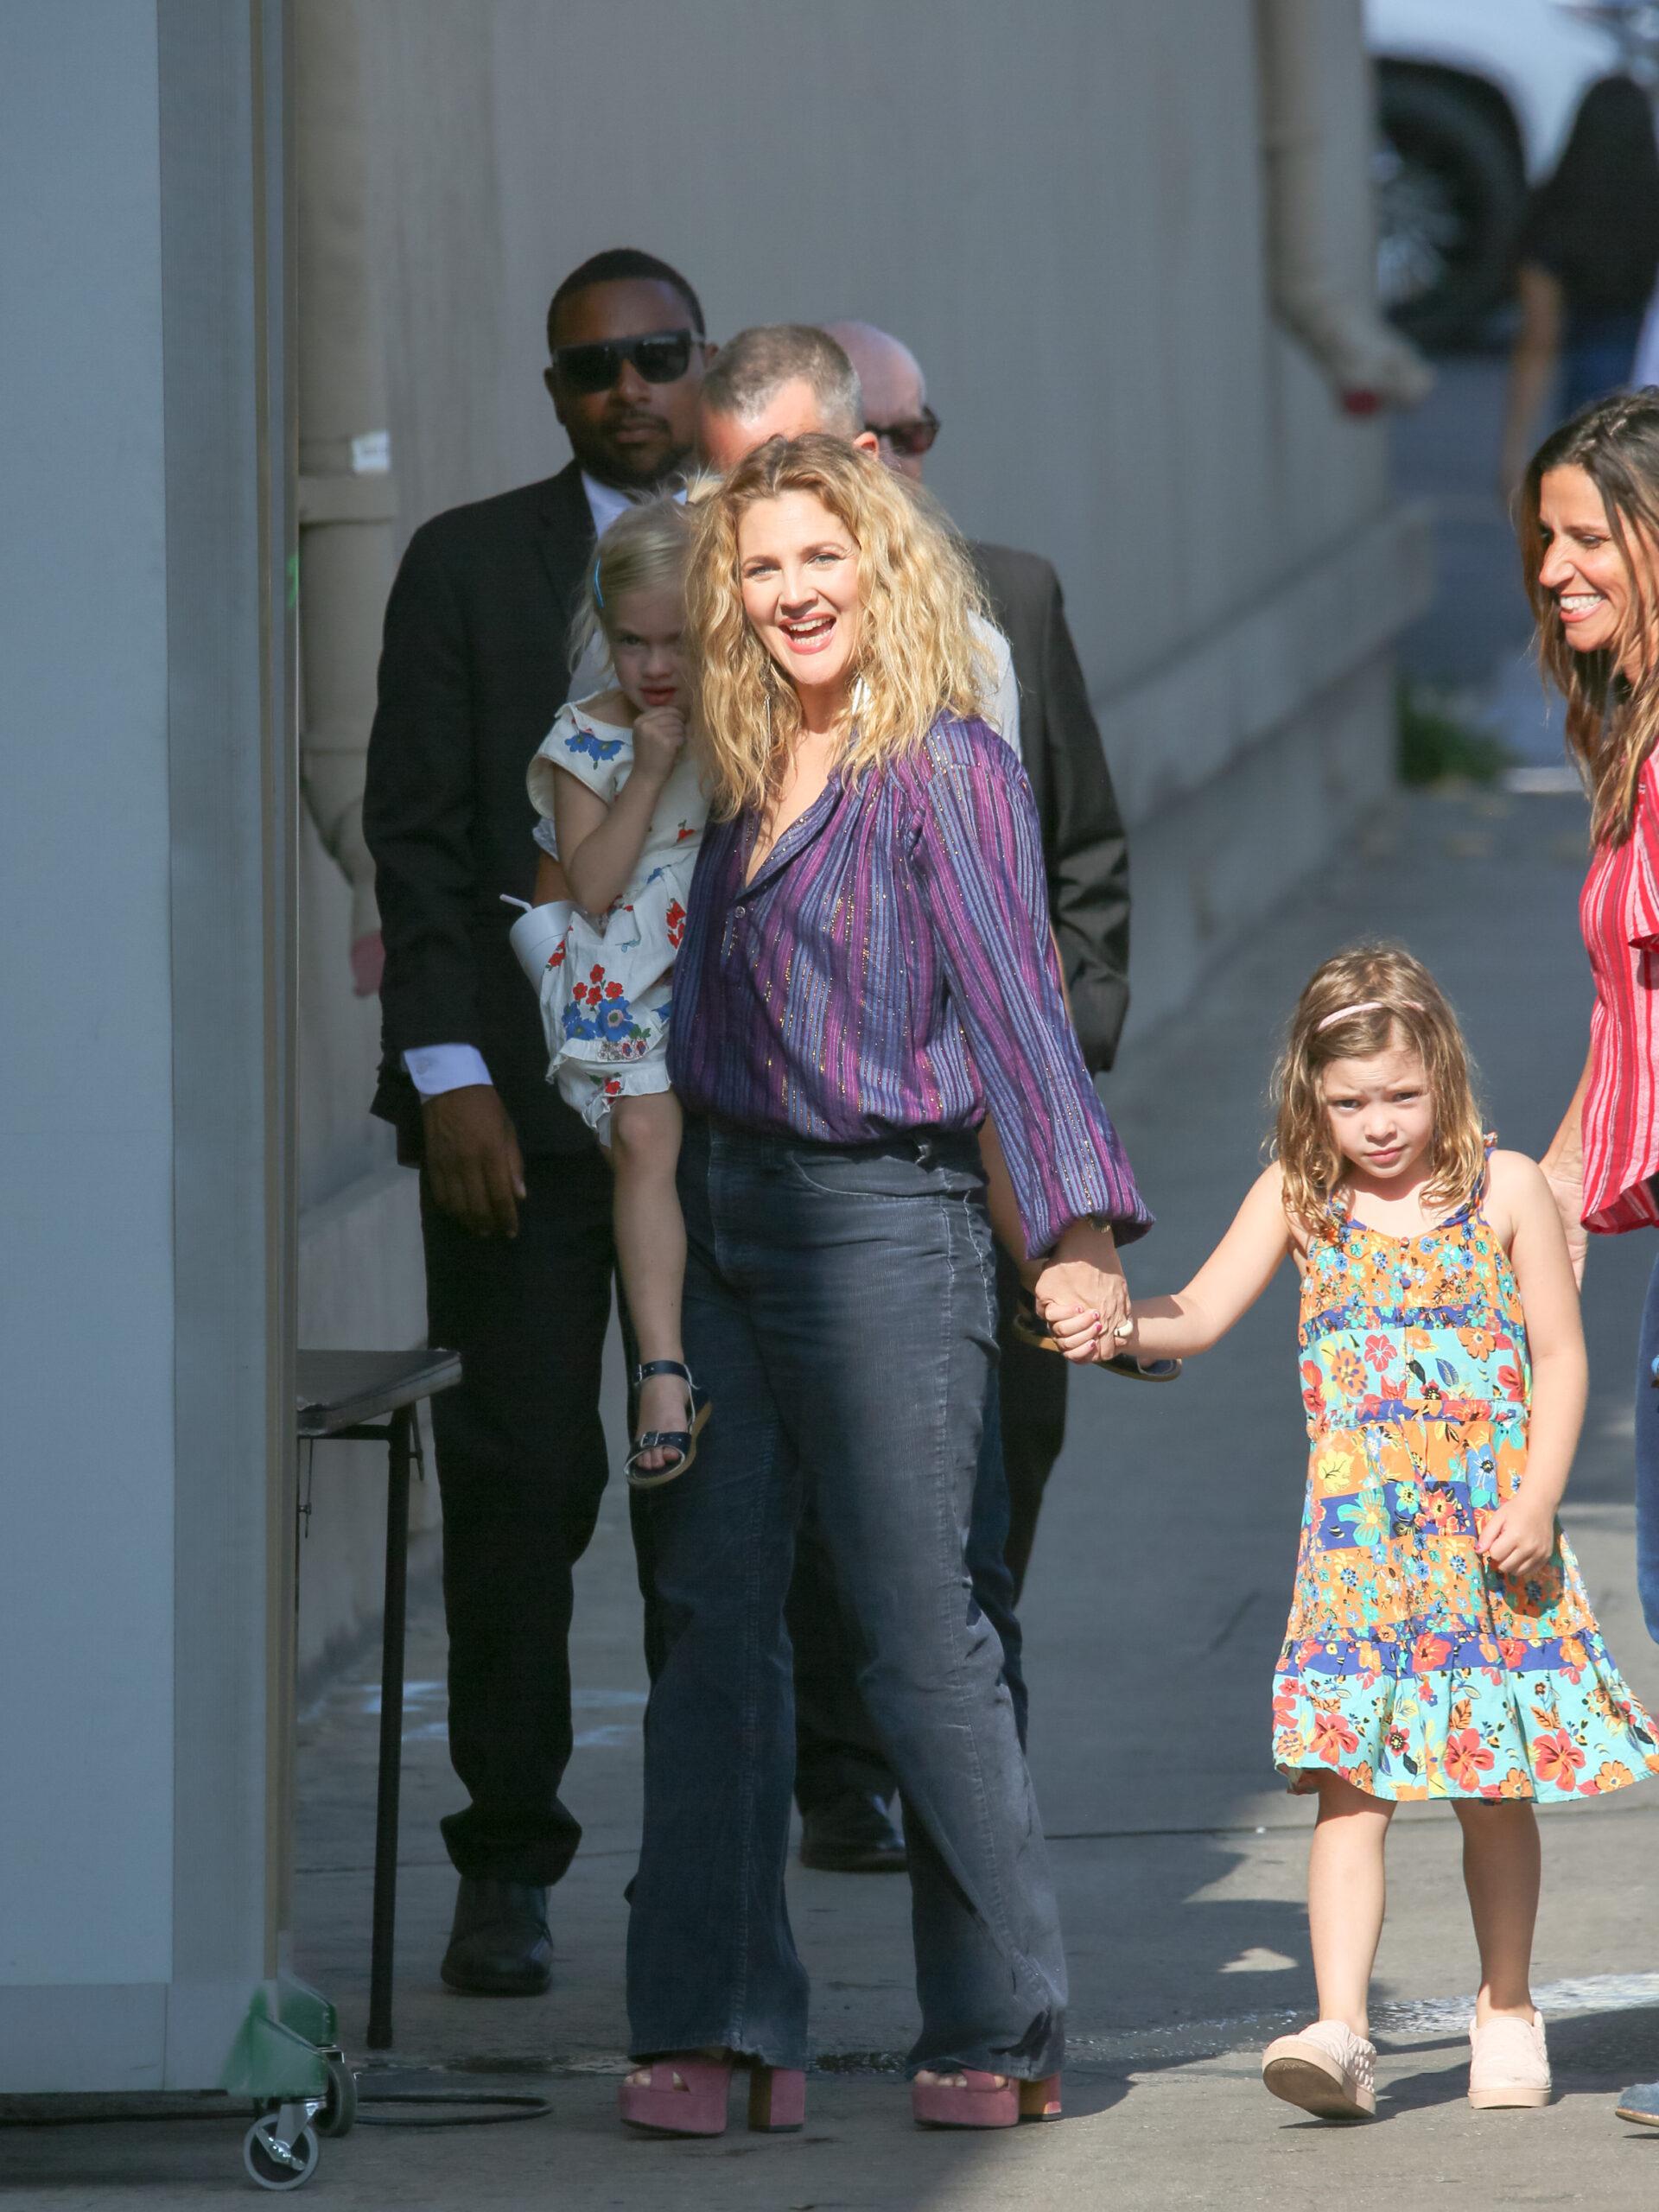 Drew Barrymore with daughters Olive and Frankie are seen arriving at the 'Jimmy Kimmel Live' in Los Angeles